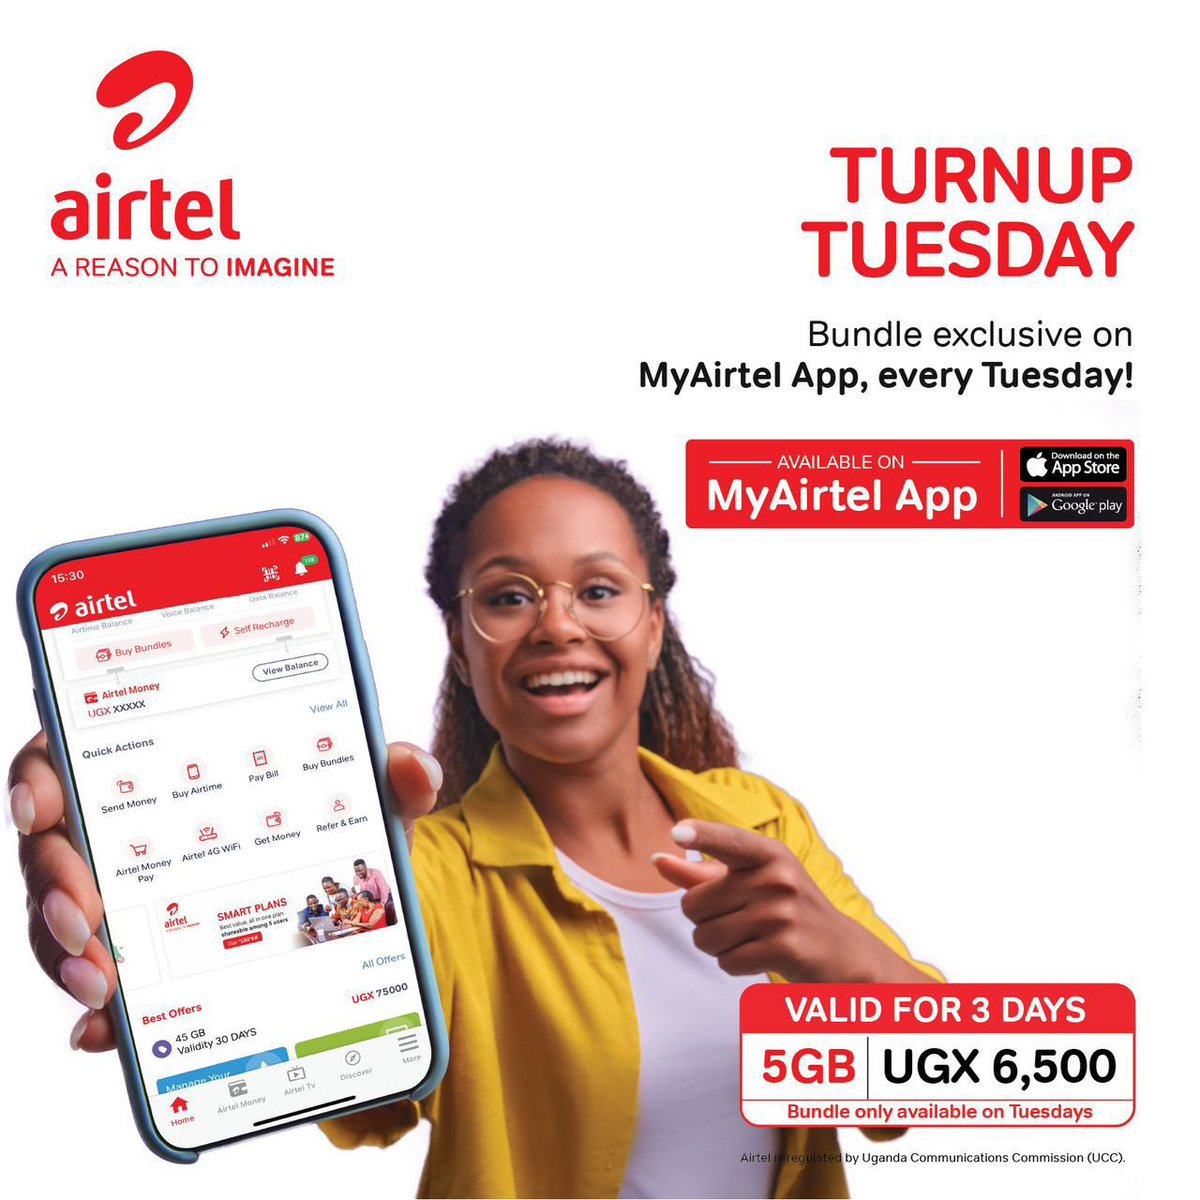 Brighten up your day with #TurnUpTuesday bundle from @Airtel_Ug at only UGX 6,500. Download the #MyAirtelApp via airtelafrica.onelink.me/cGyr/qgj4qeu2 to subscribe for this offer.